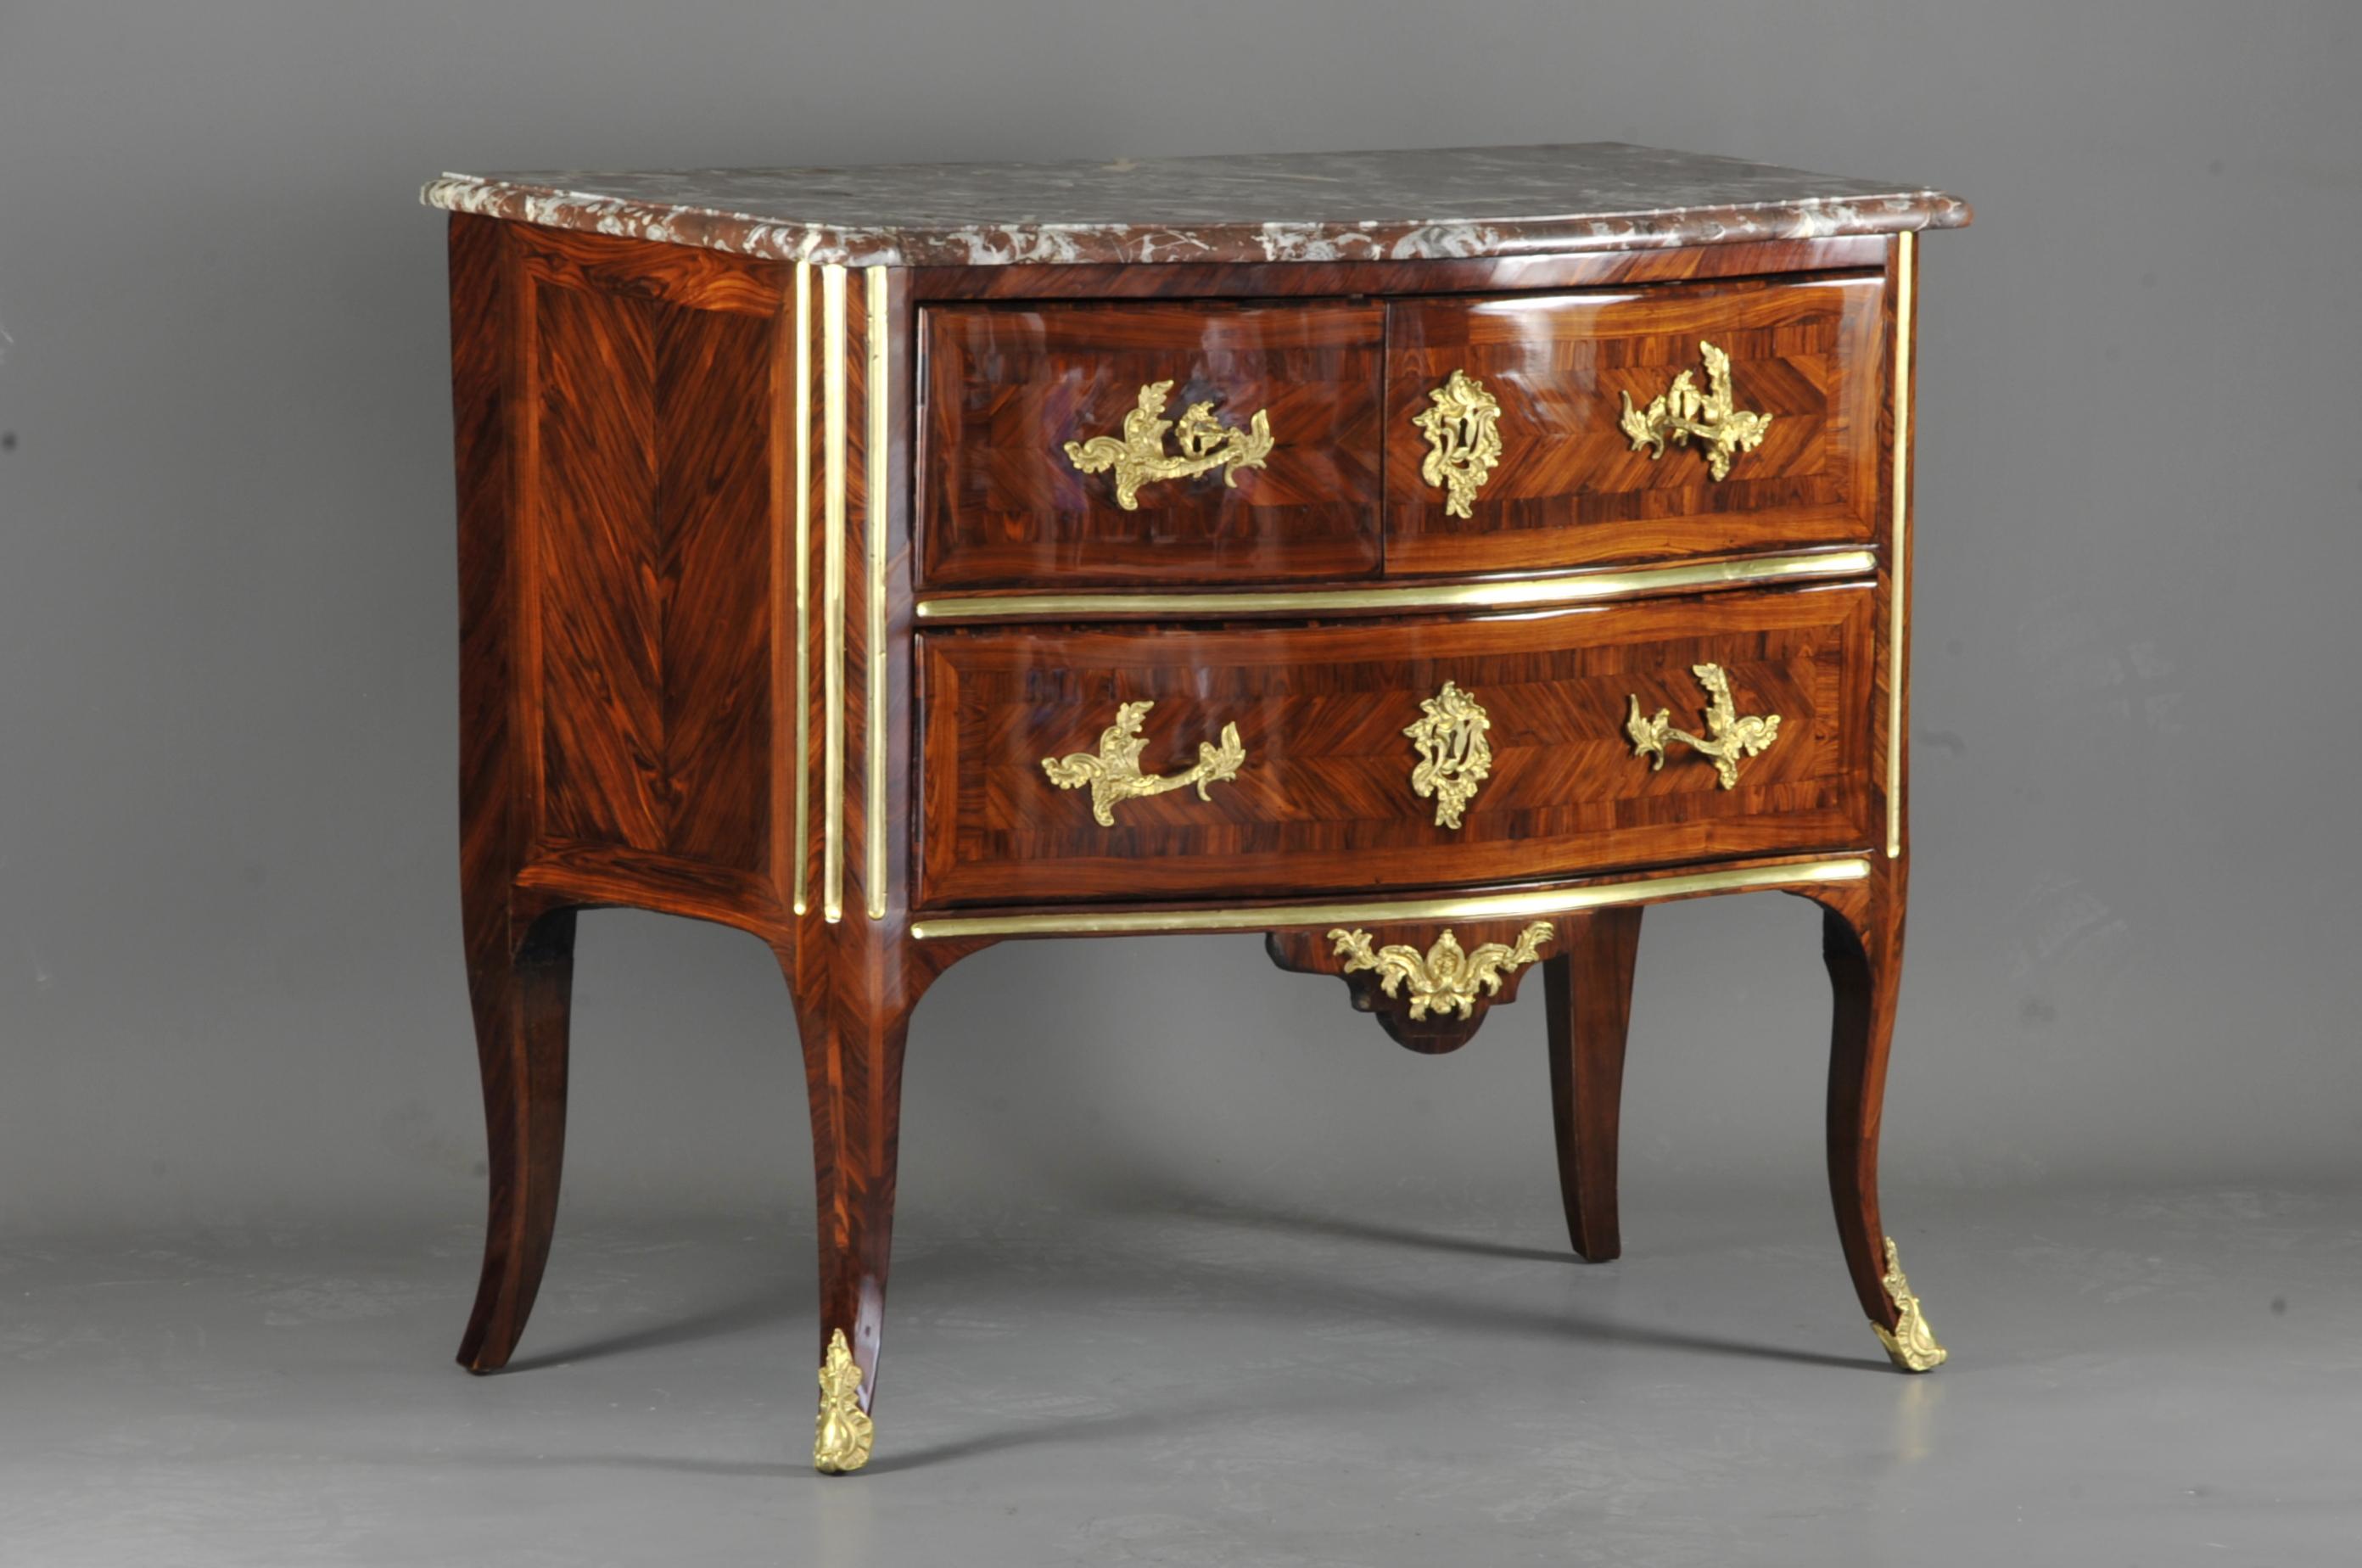 Delaitre Louis, Parisian cabinetmaker received master on November 19, 1738.

Exceptional chest of drawers from the Louis XV period made of kingwood veneer inlaid with frieze and geometric frames, opening with three drawers in two rows, the two top